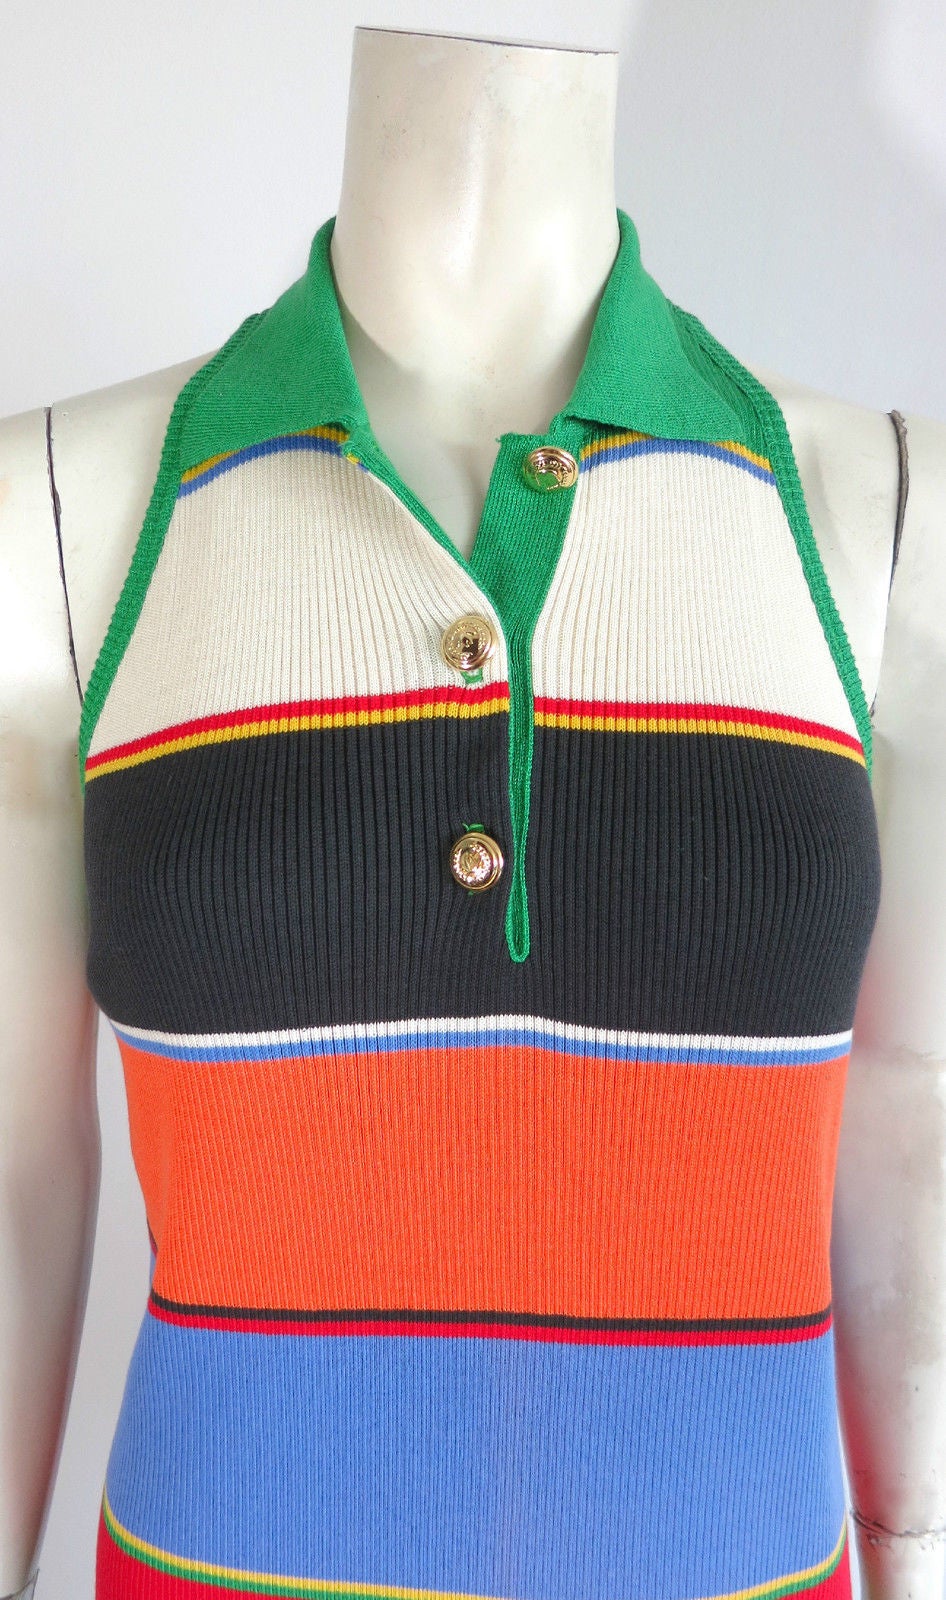 Never worn with original tag, 1990's MOSCHINO multi-color rib knit dress

Stetson laurel wreath engraved metal buttons at from with solid green, rib-knit collar and armhole binding

Made in Italy, as labeled

Unworn, with the original tag